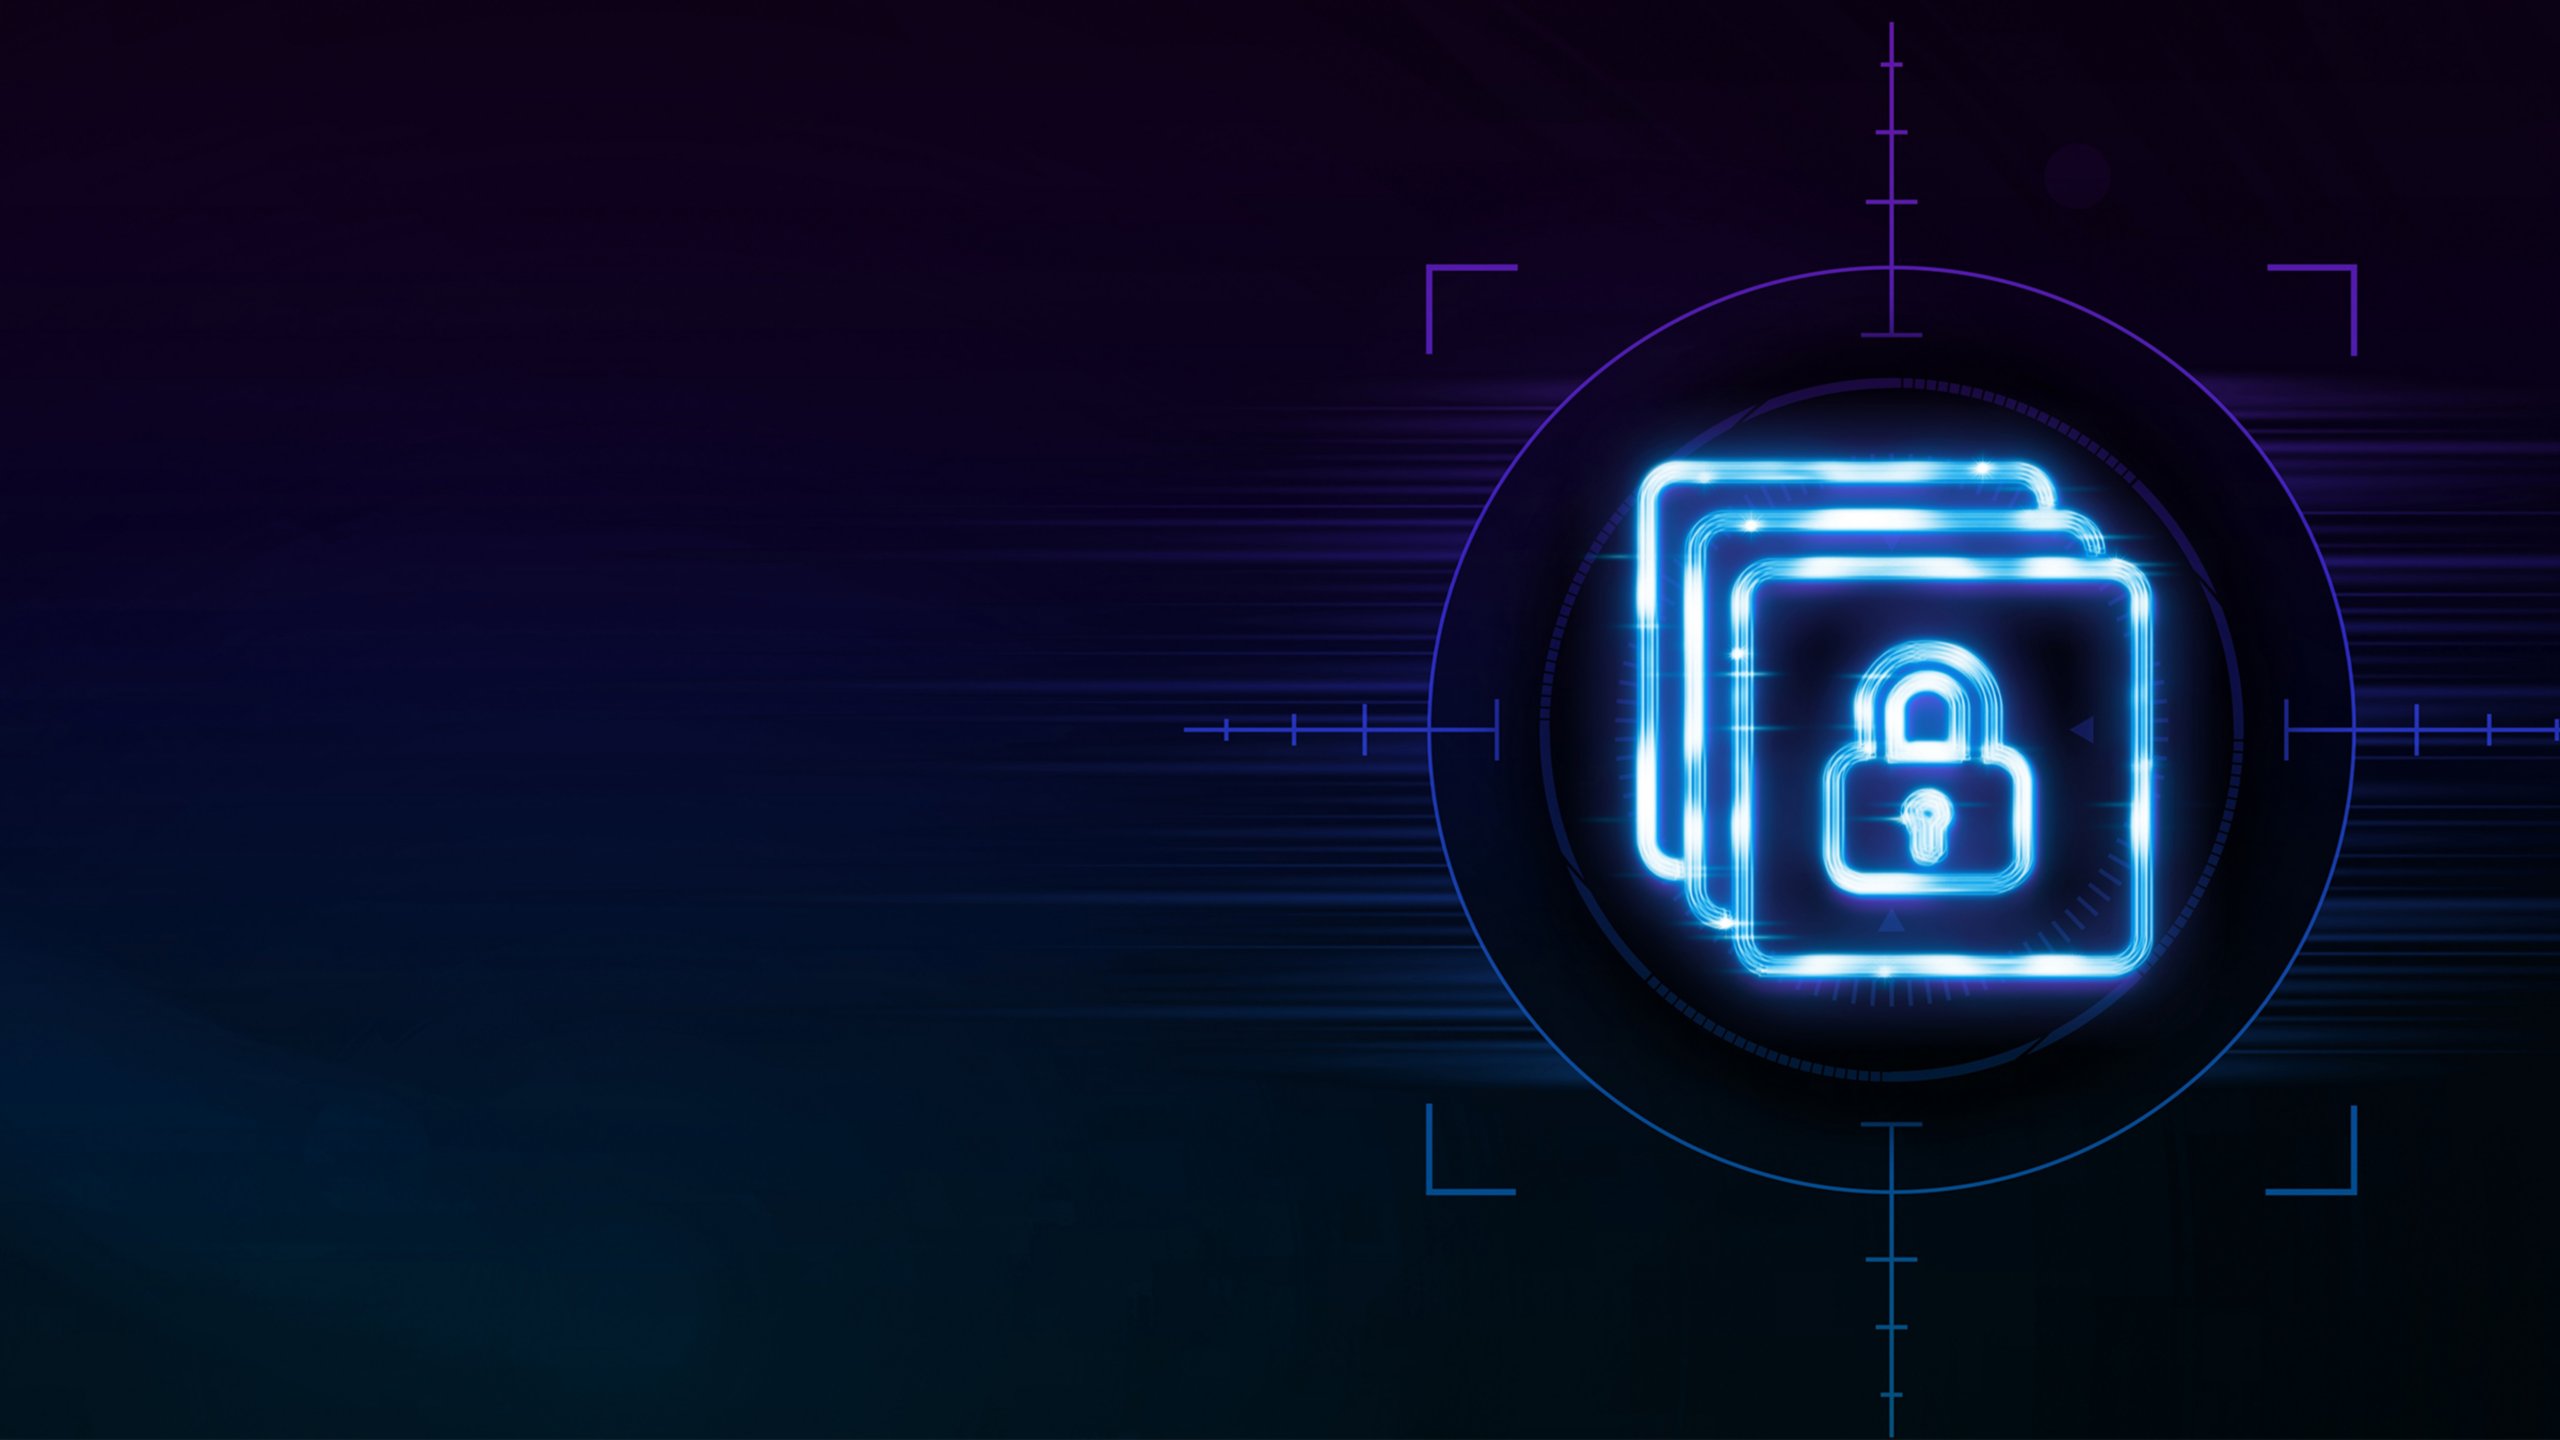 Neon blue security lock icon over dark background fading purple to green.